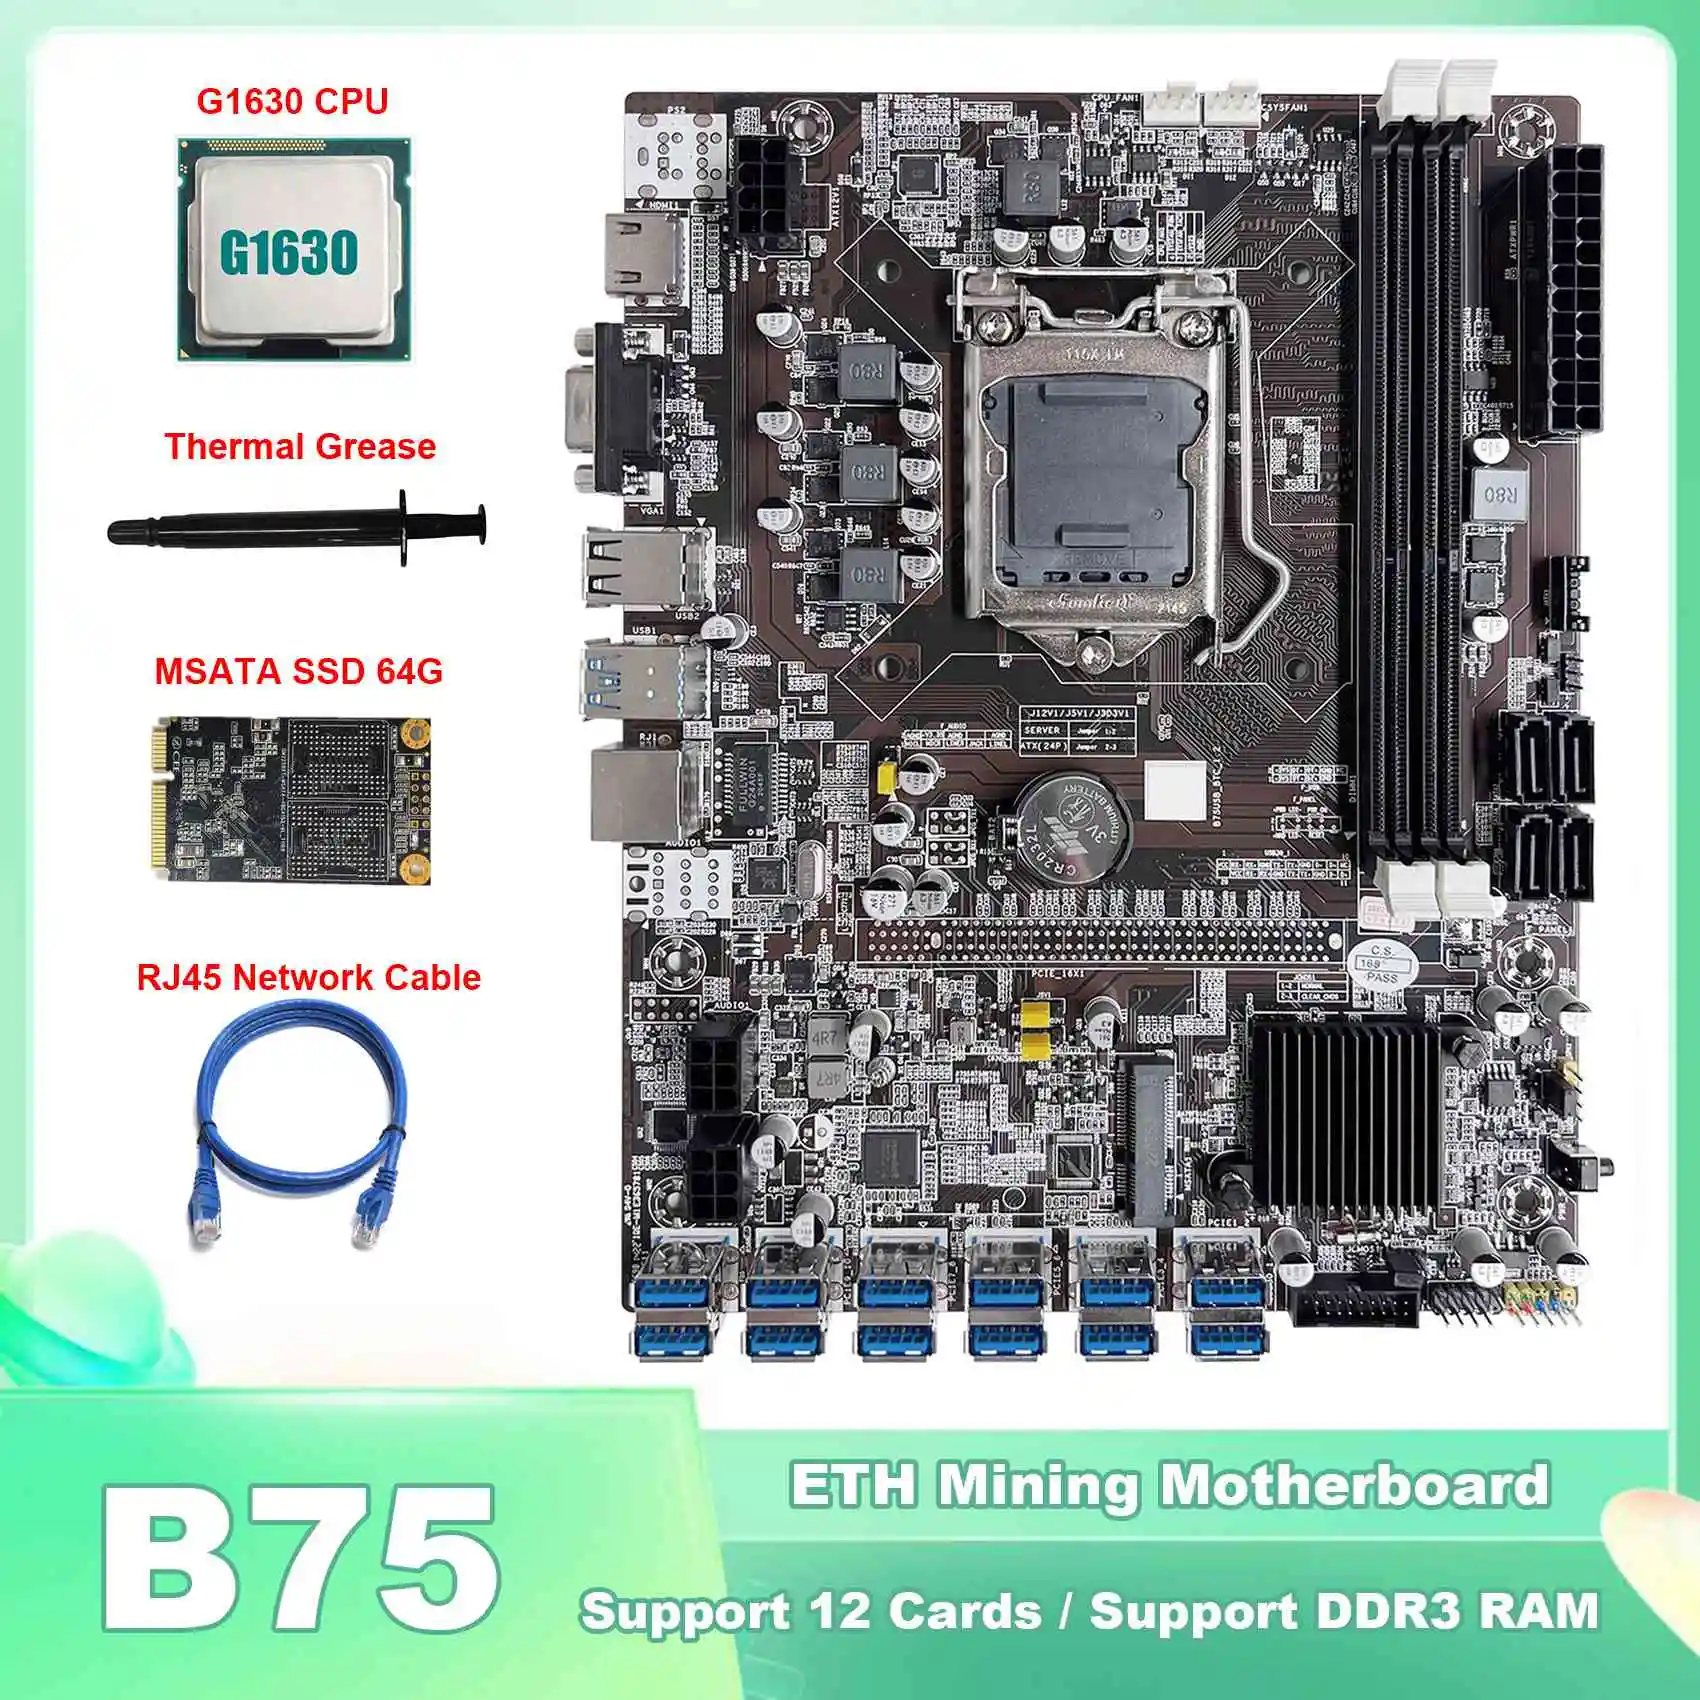 

B75 ETH Mining Motherboard 12 PCIE to USB LGA1155 with G1630 CPU+MSATA SSD 64G+Thermal Grease+RJ45 Network Cable